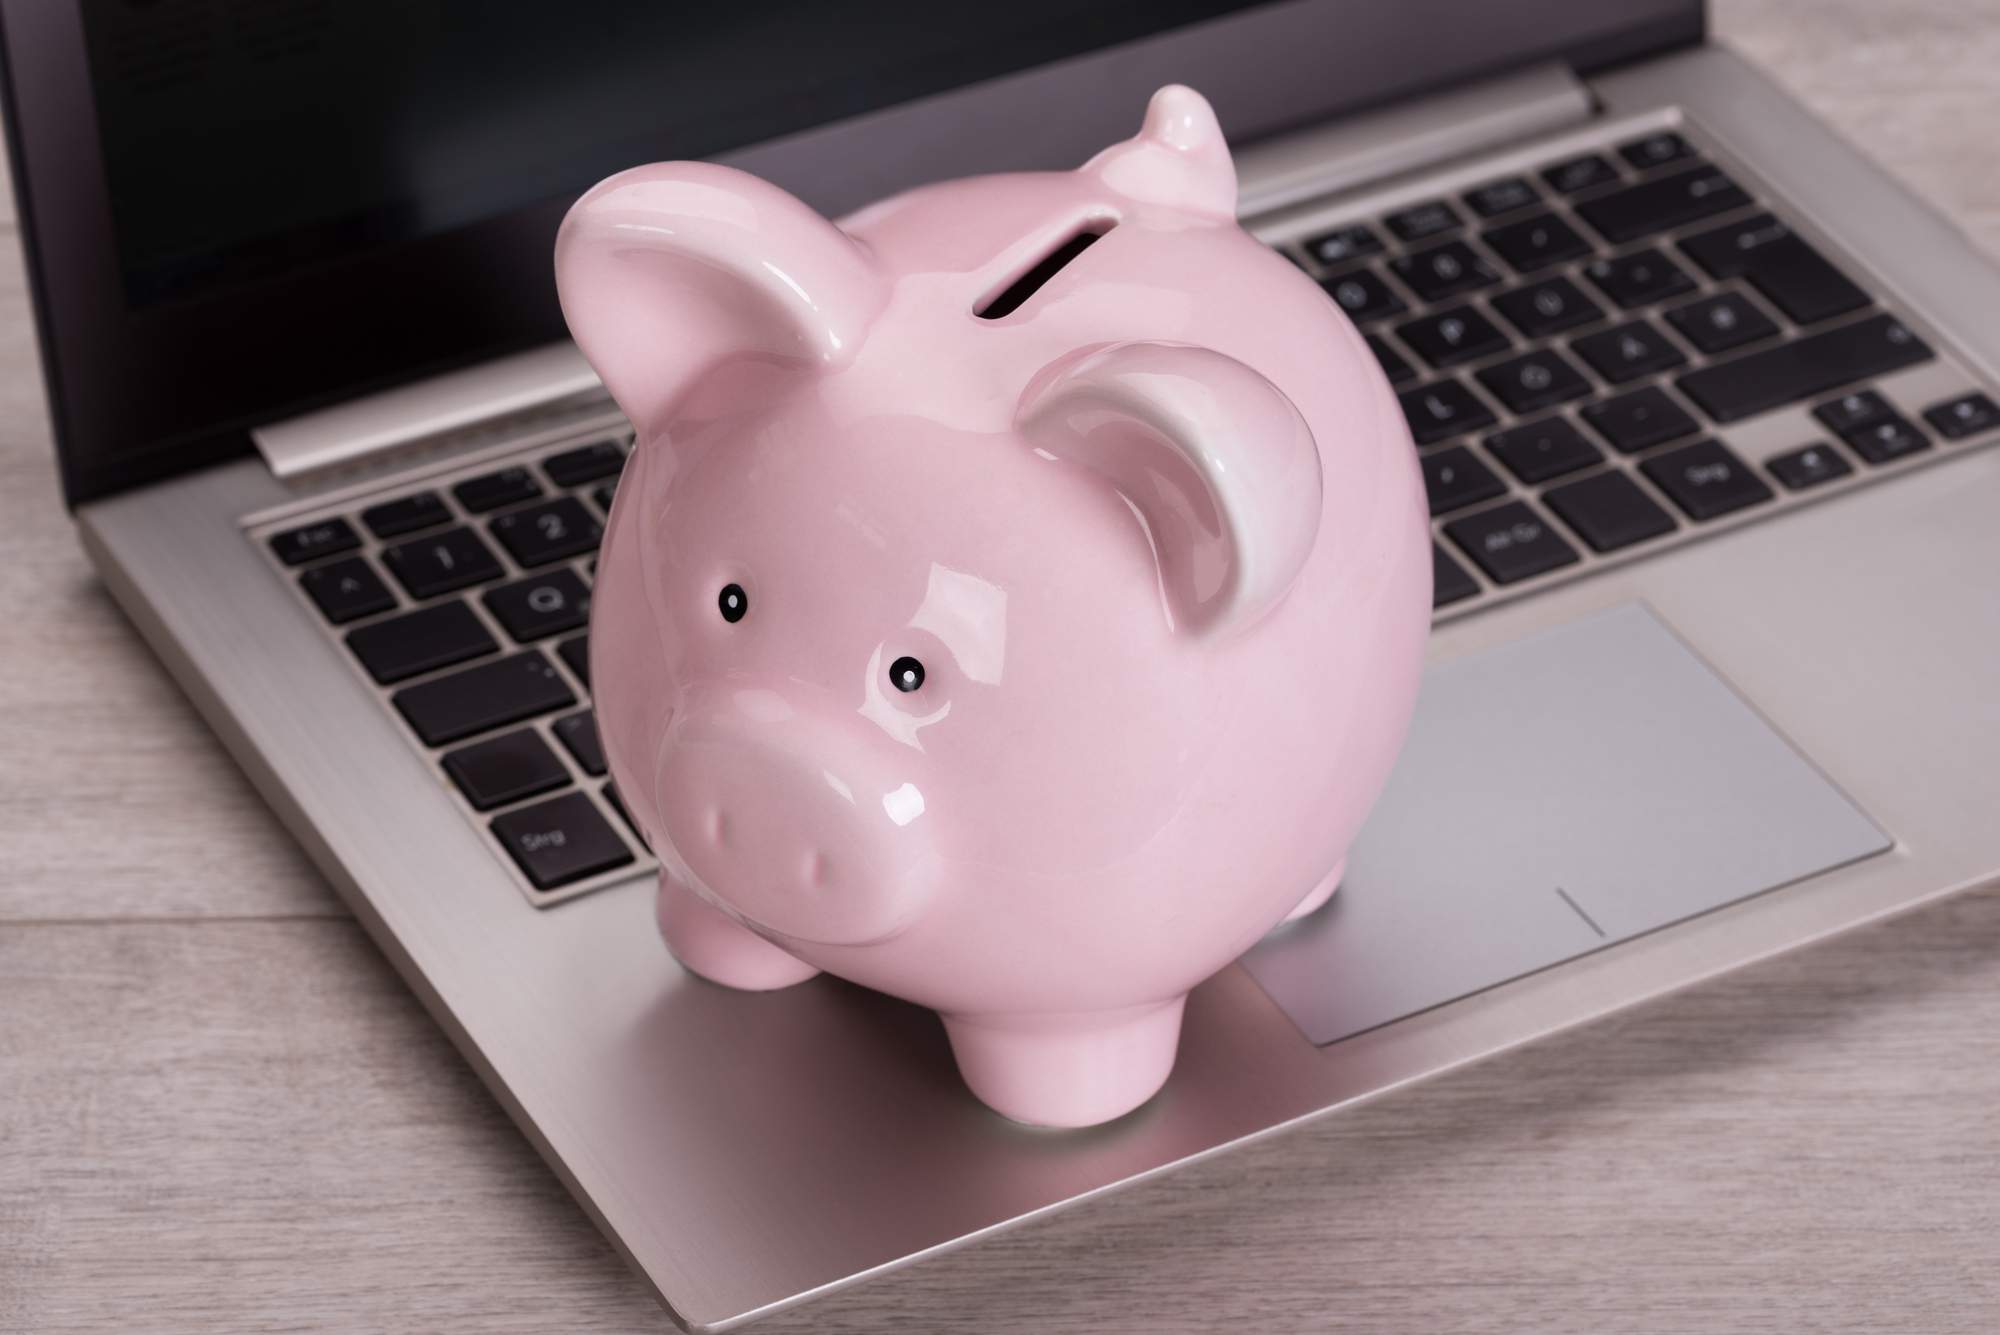 How to get the most out of your technology budget